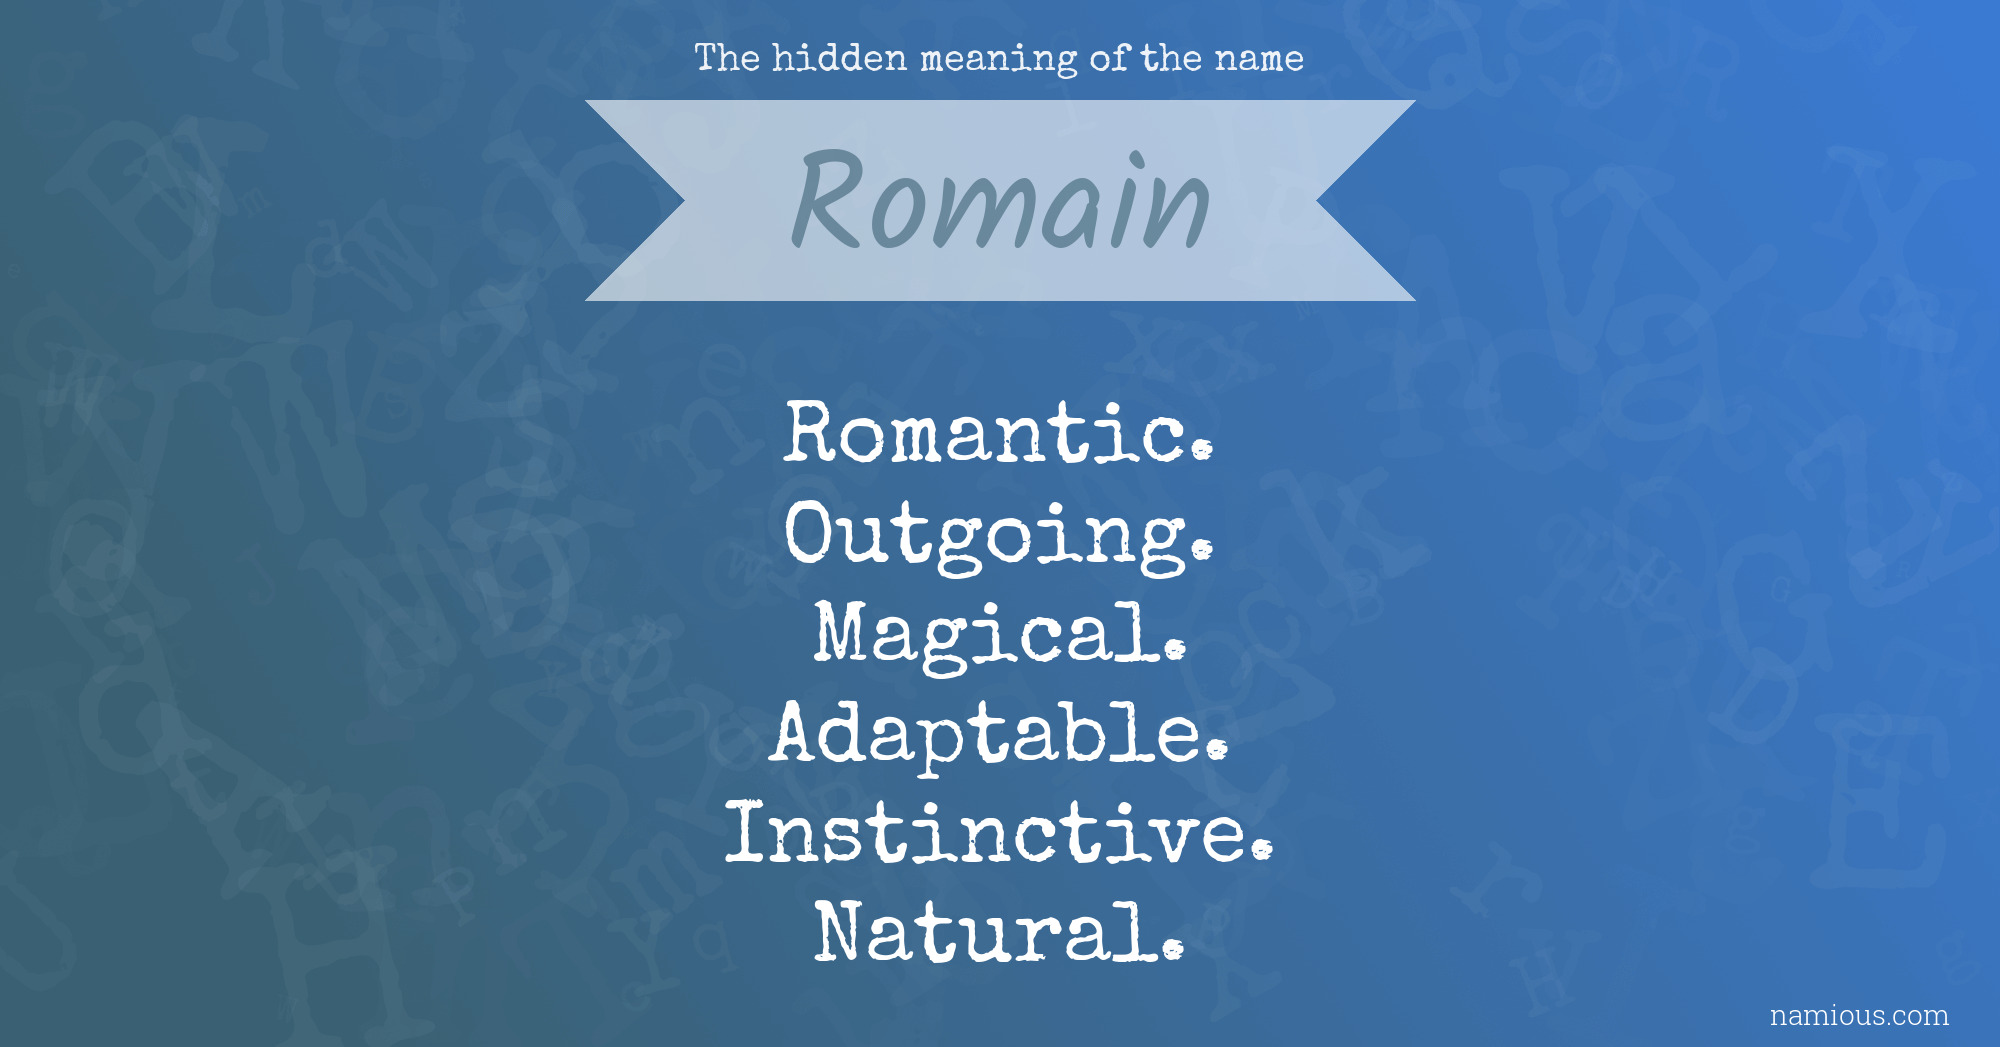 The hidden meaning of the name Romain